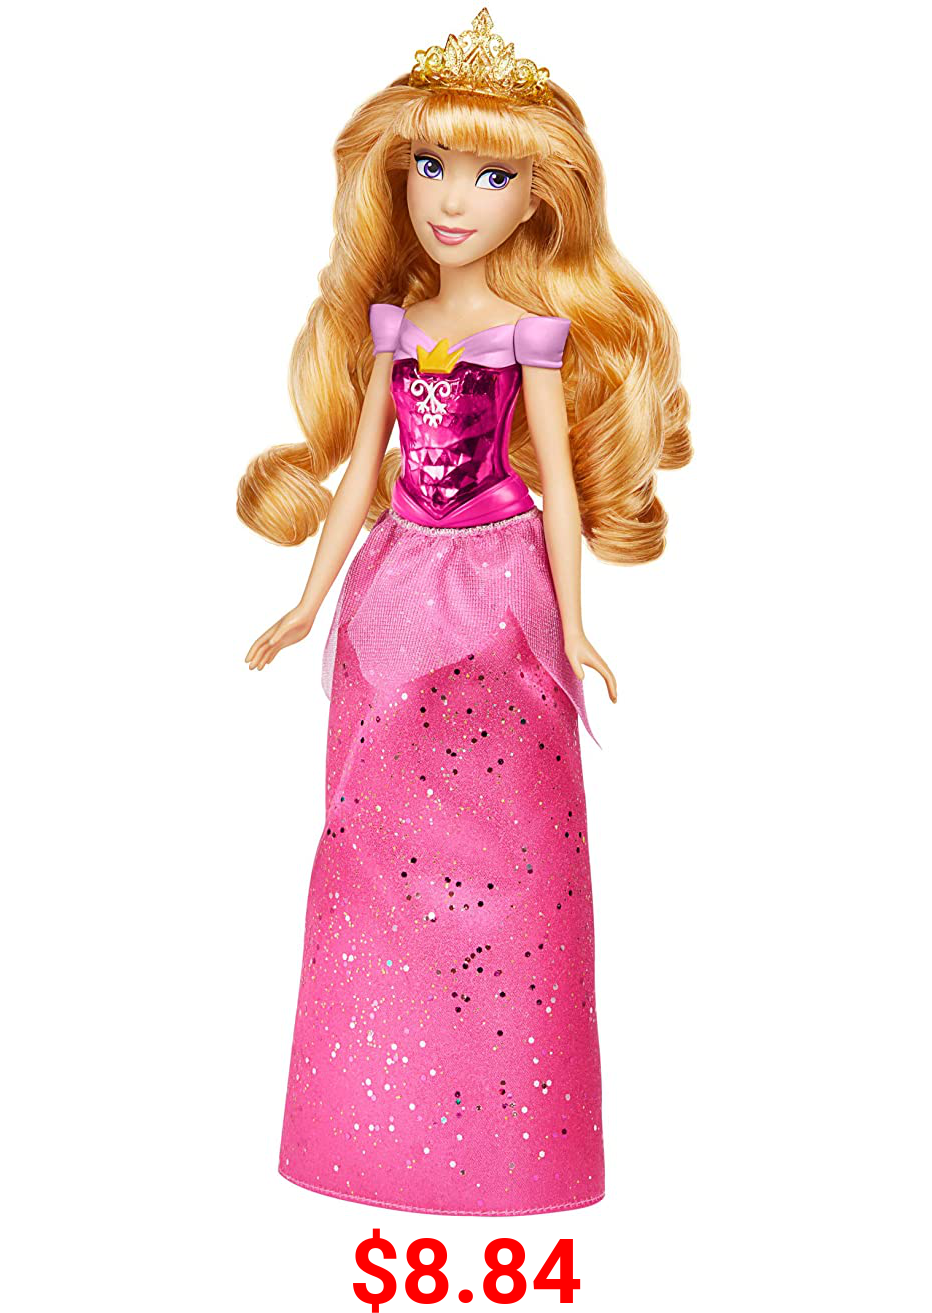 Disney Princess Royal Shimmer Aurora Doll, Fashion Doll with Skirt and Accessories, Toy for Kids Ages 3 and Up , Pink